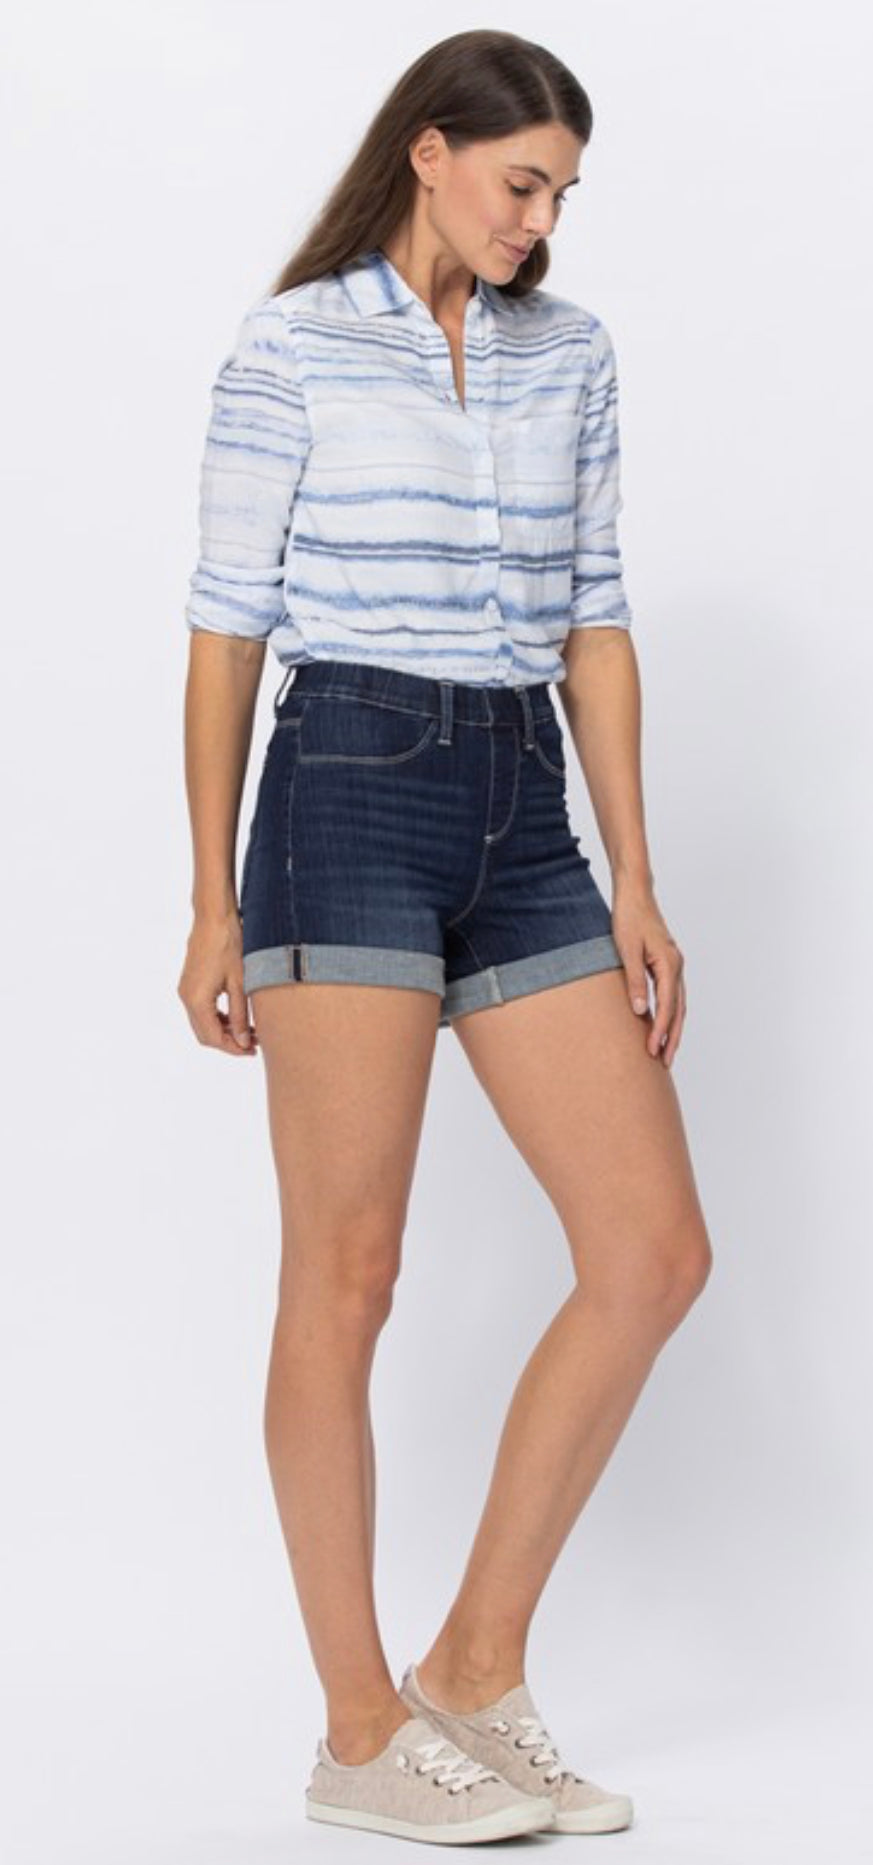 High Waisted Pull on Shorts